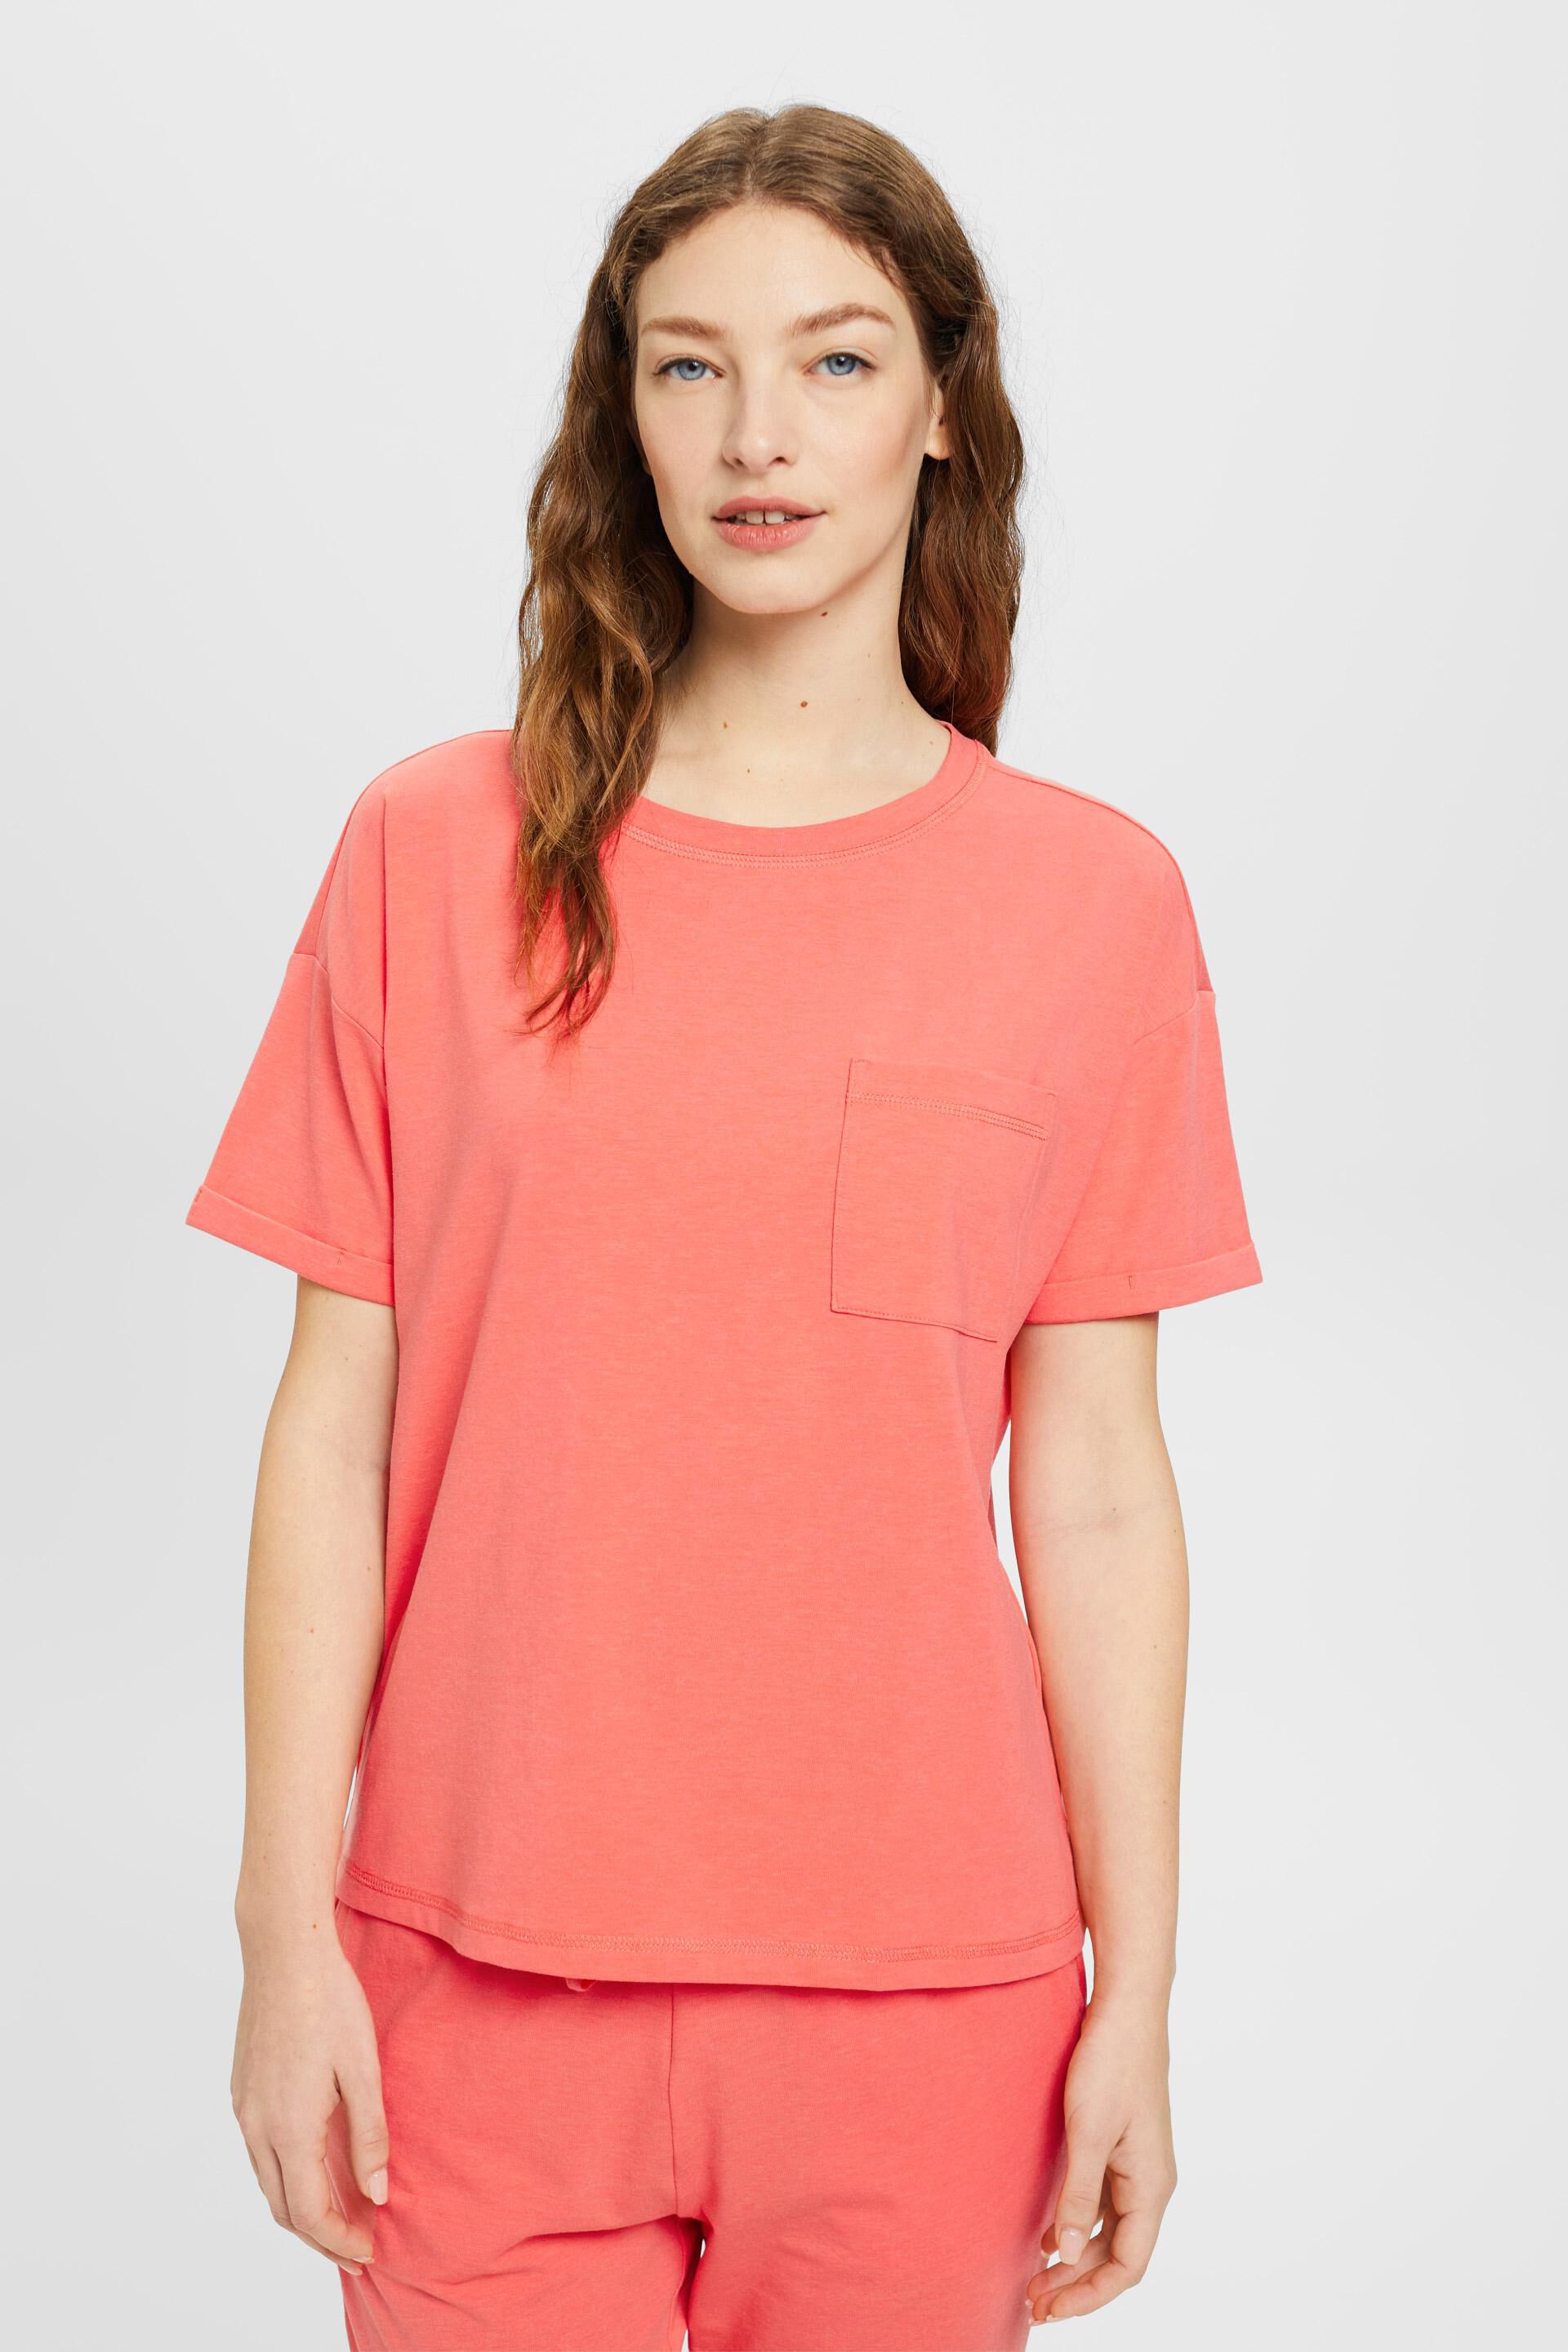 Esprit T-shirt cotton pocket blended breast in with a